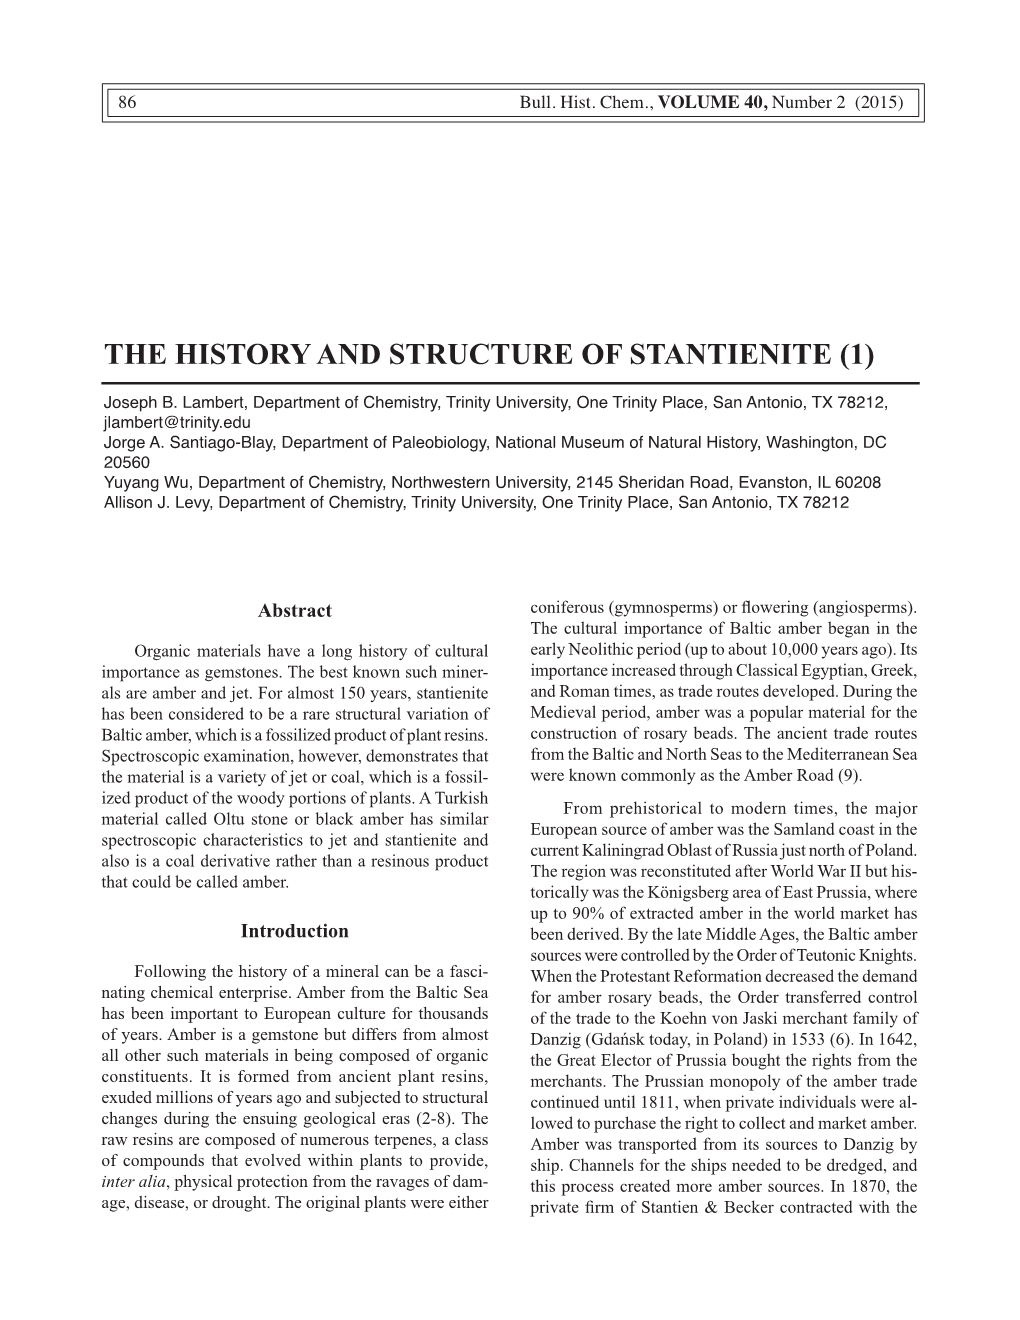 The History and Structure of Stantienite (1)